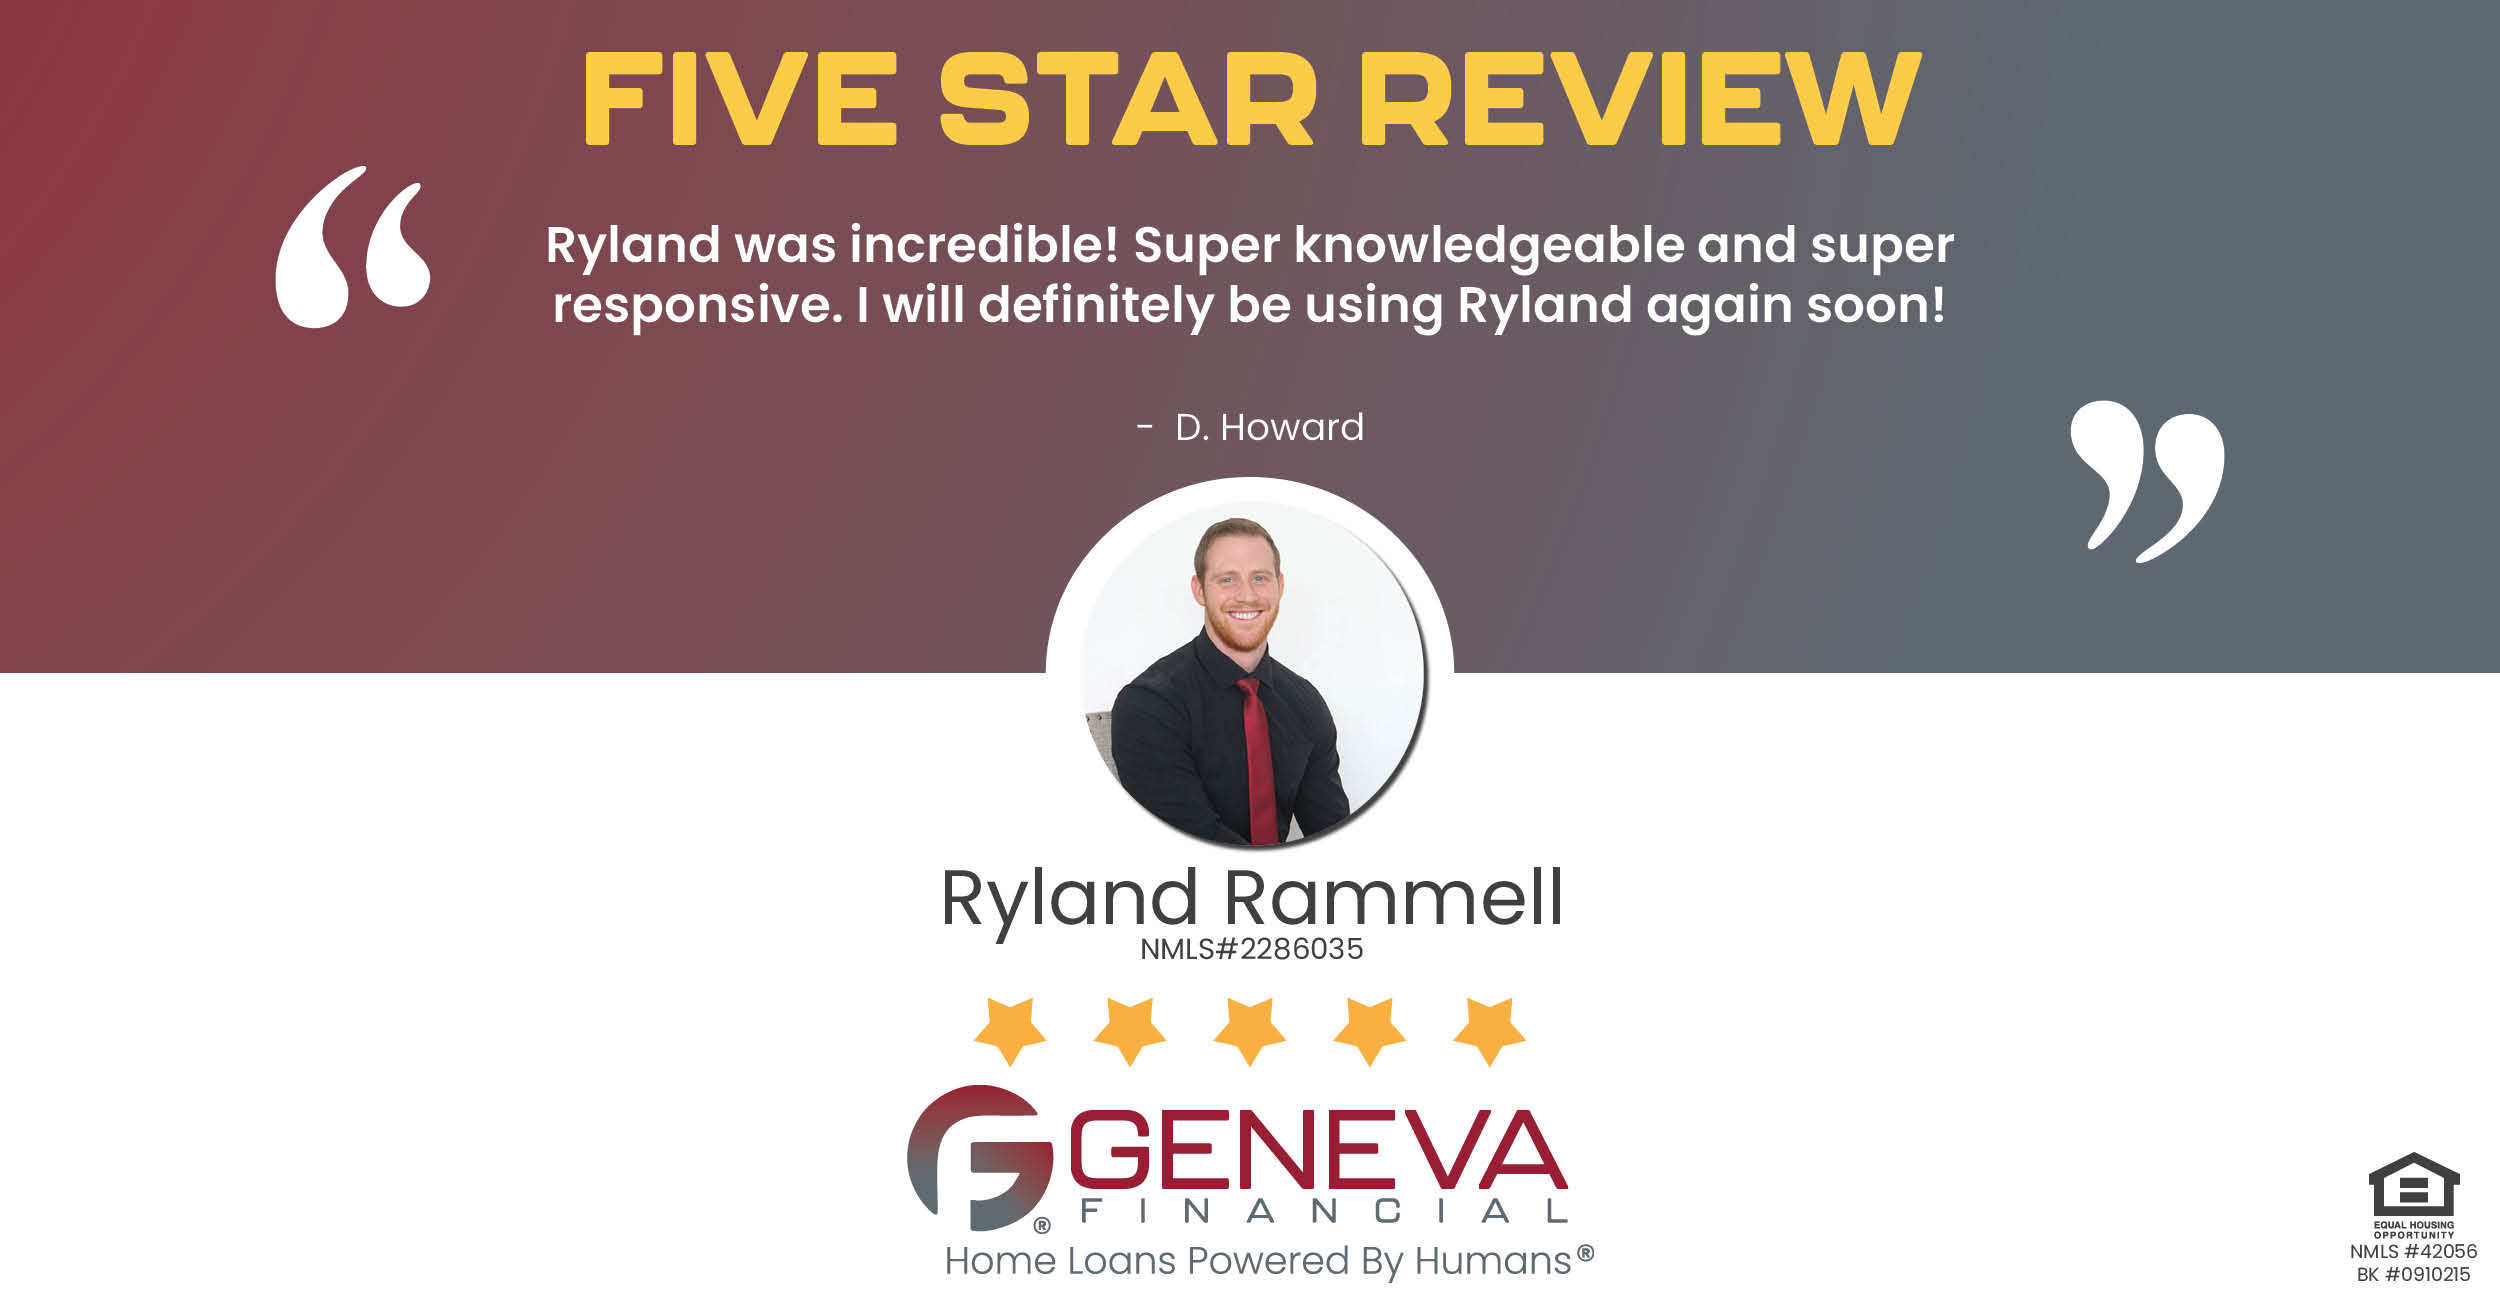 5 Star Review for Ryland Rammell, Licensed Mortgage Loan Officer with Geneva Financial, Pocatello, ID – Home Loans Powered by Humans®.